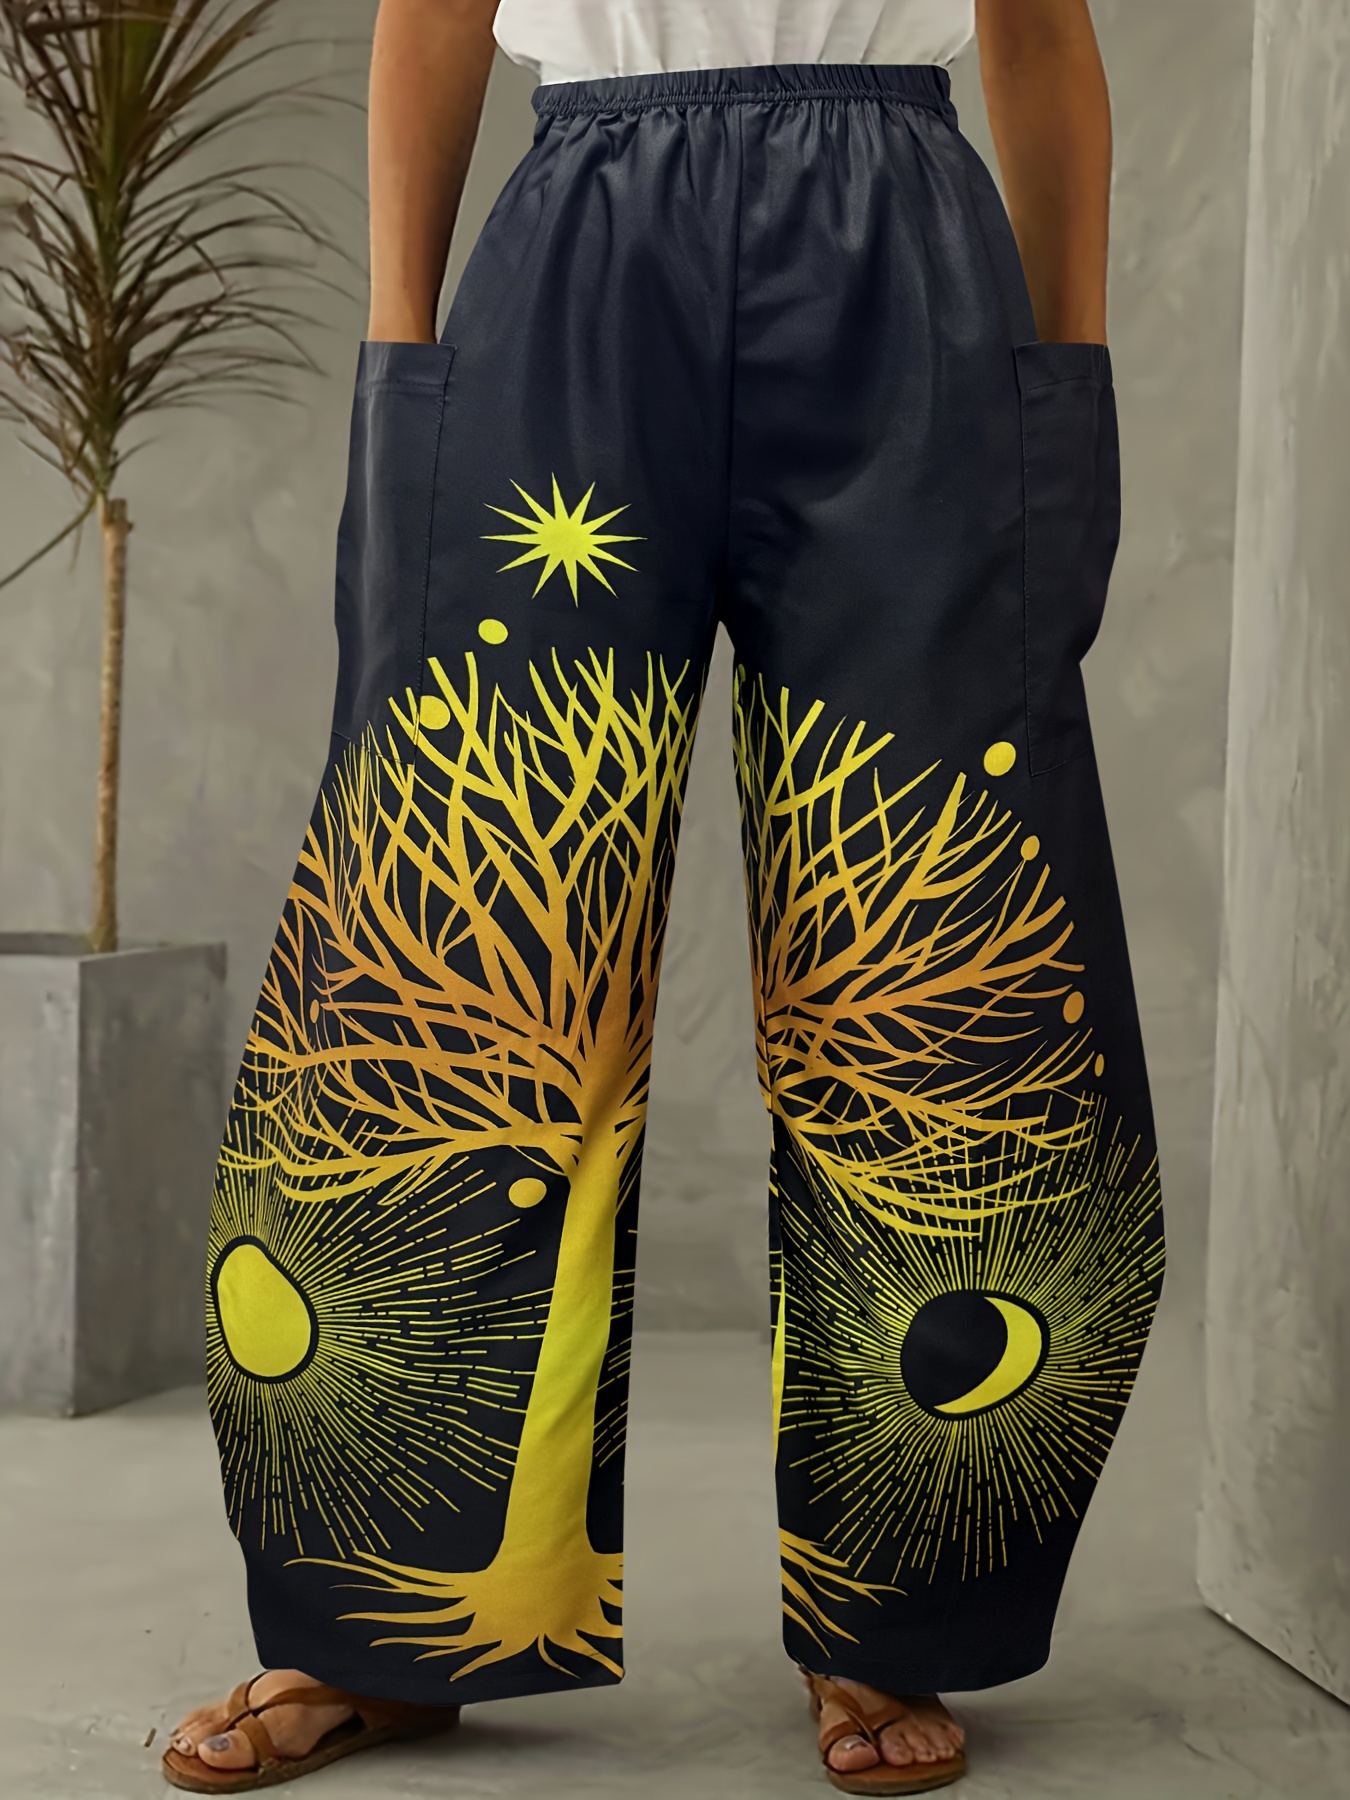 Patterns of Time . Ladies' Classic Fit Trousers and Shorts - Flat Front  with Medium Wide Legs with Side opening inseam Pocket by Laughing Moon,  Pants - All Eras